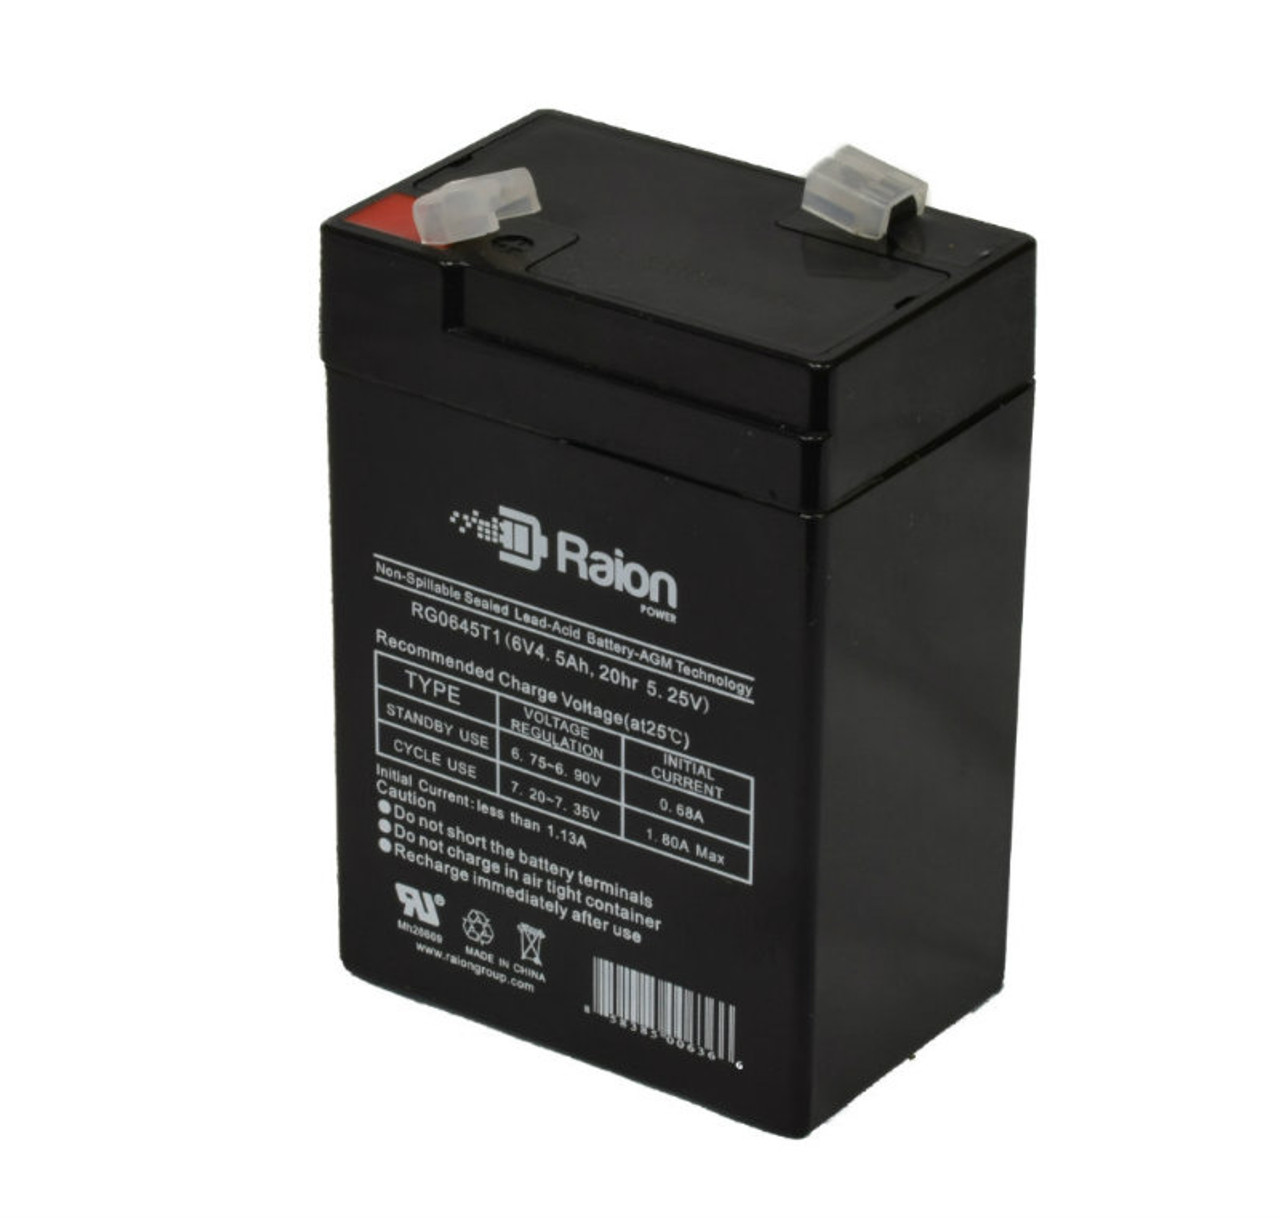 Raion Power RG0645T1 6V 4.5Ah Replacement Battery Cartridge for Technacell EP640